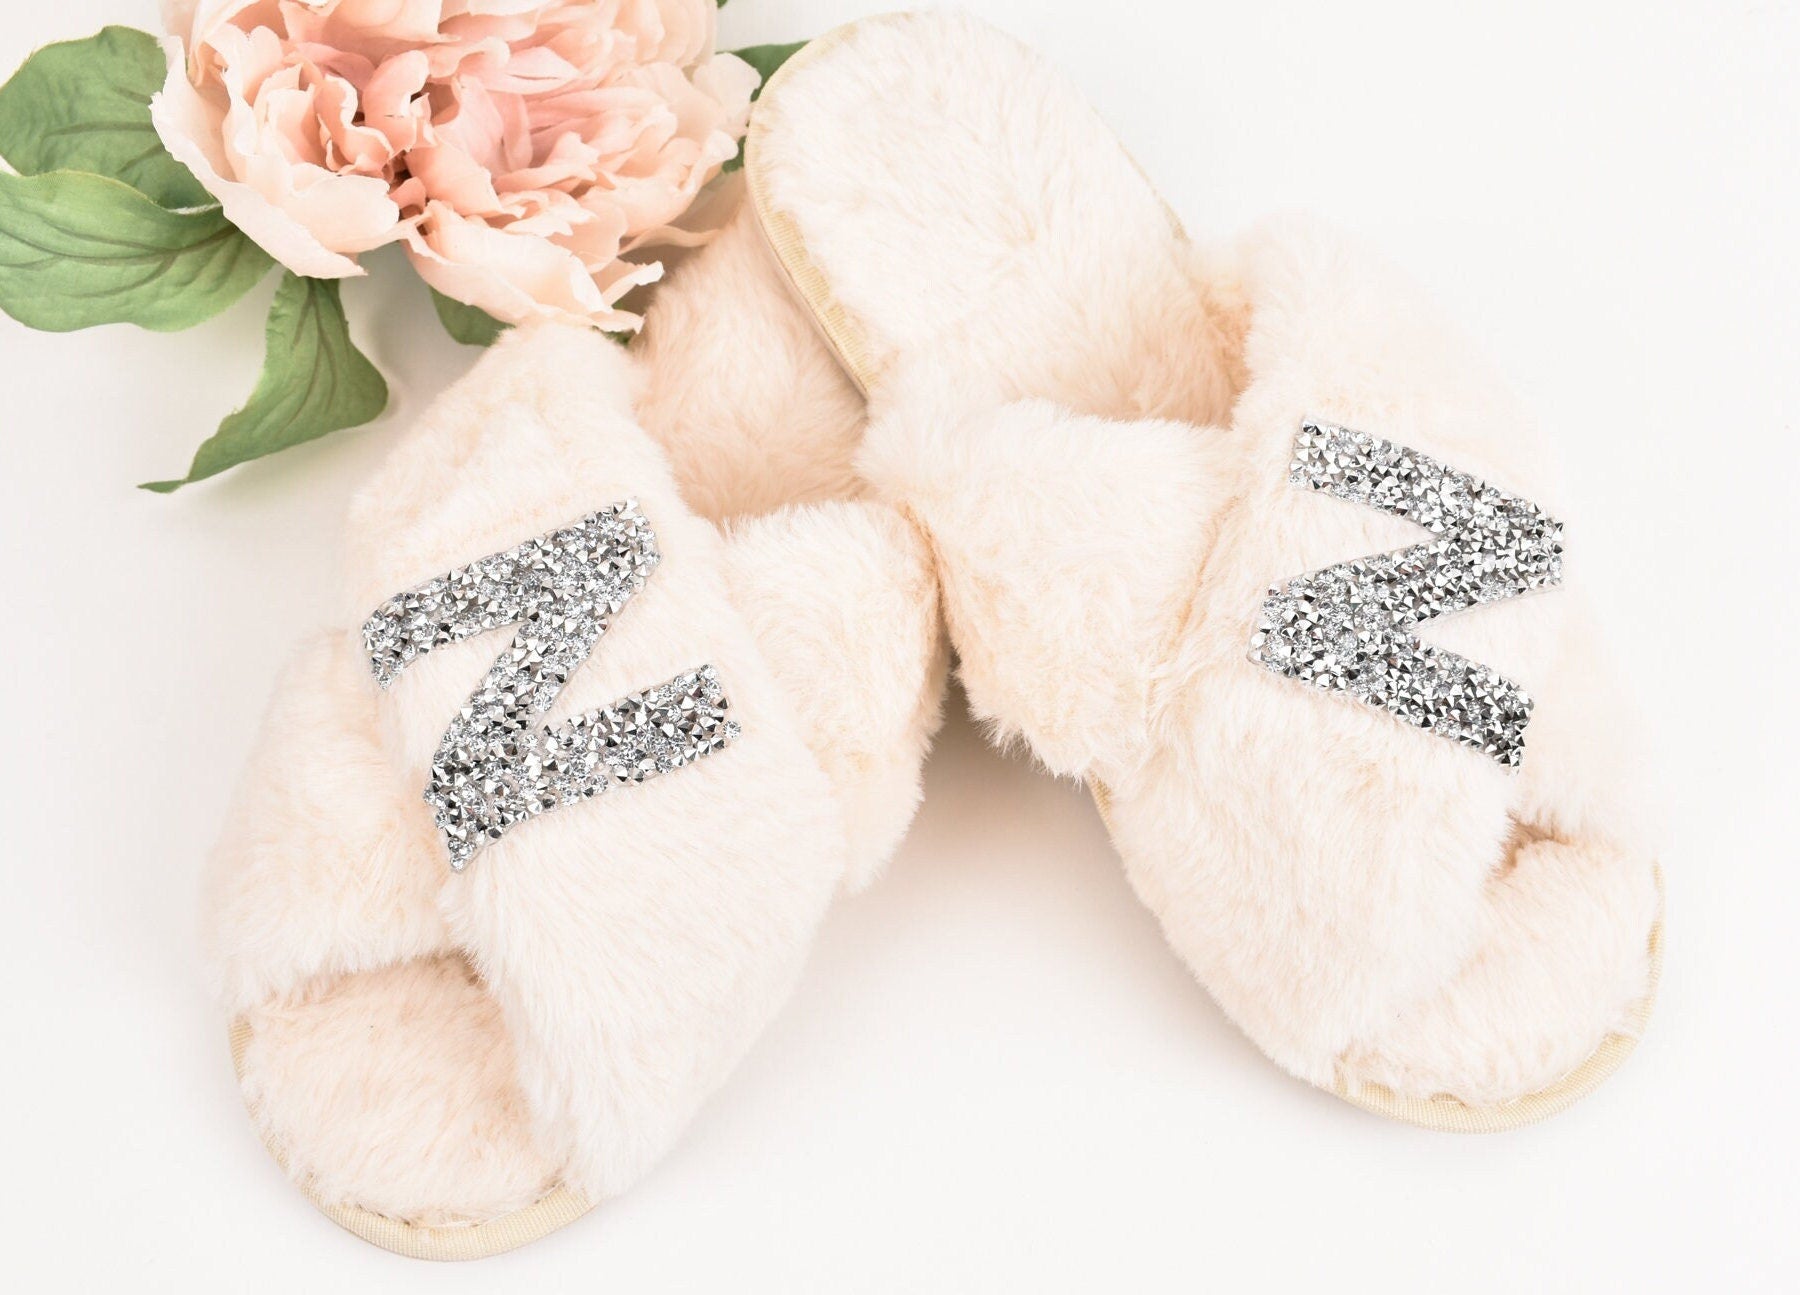 Bride Bridesmaid Slippers - Bachelorette Party - Personalized Bridal Slipper - Bridal Shower Gift - Bridesmaid Gift - Wedding Gift -BIRTHDAY